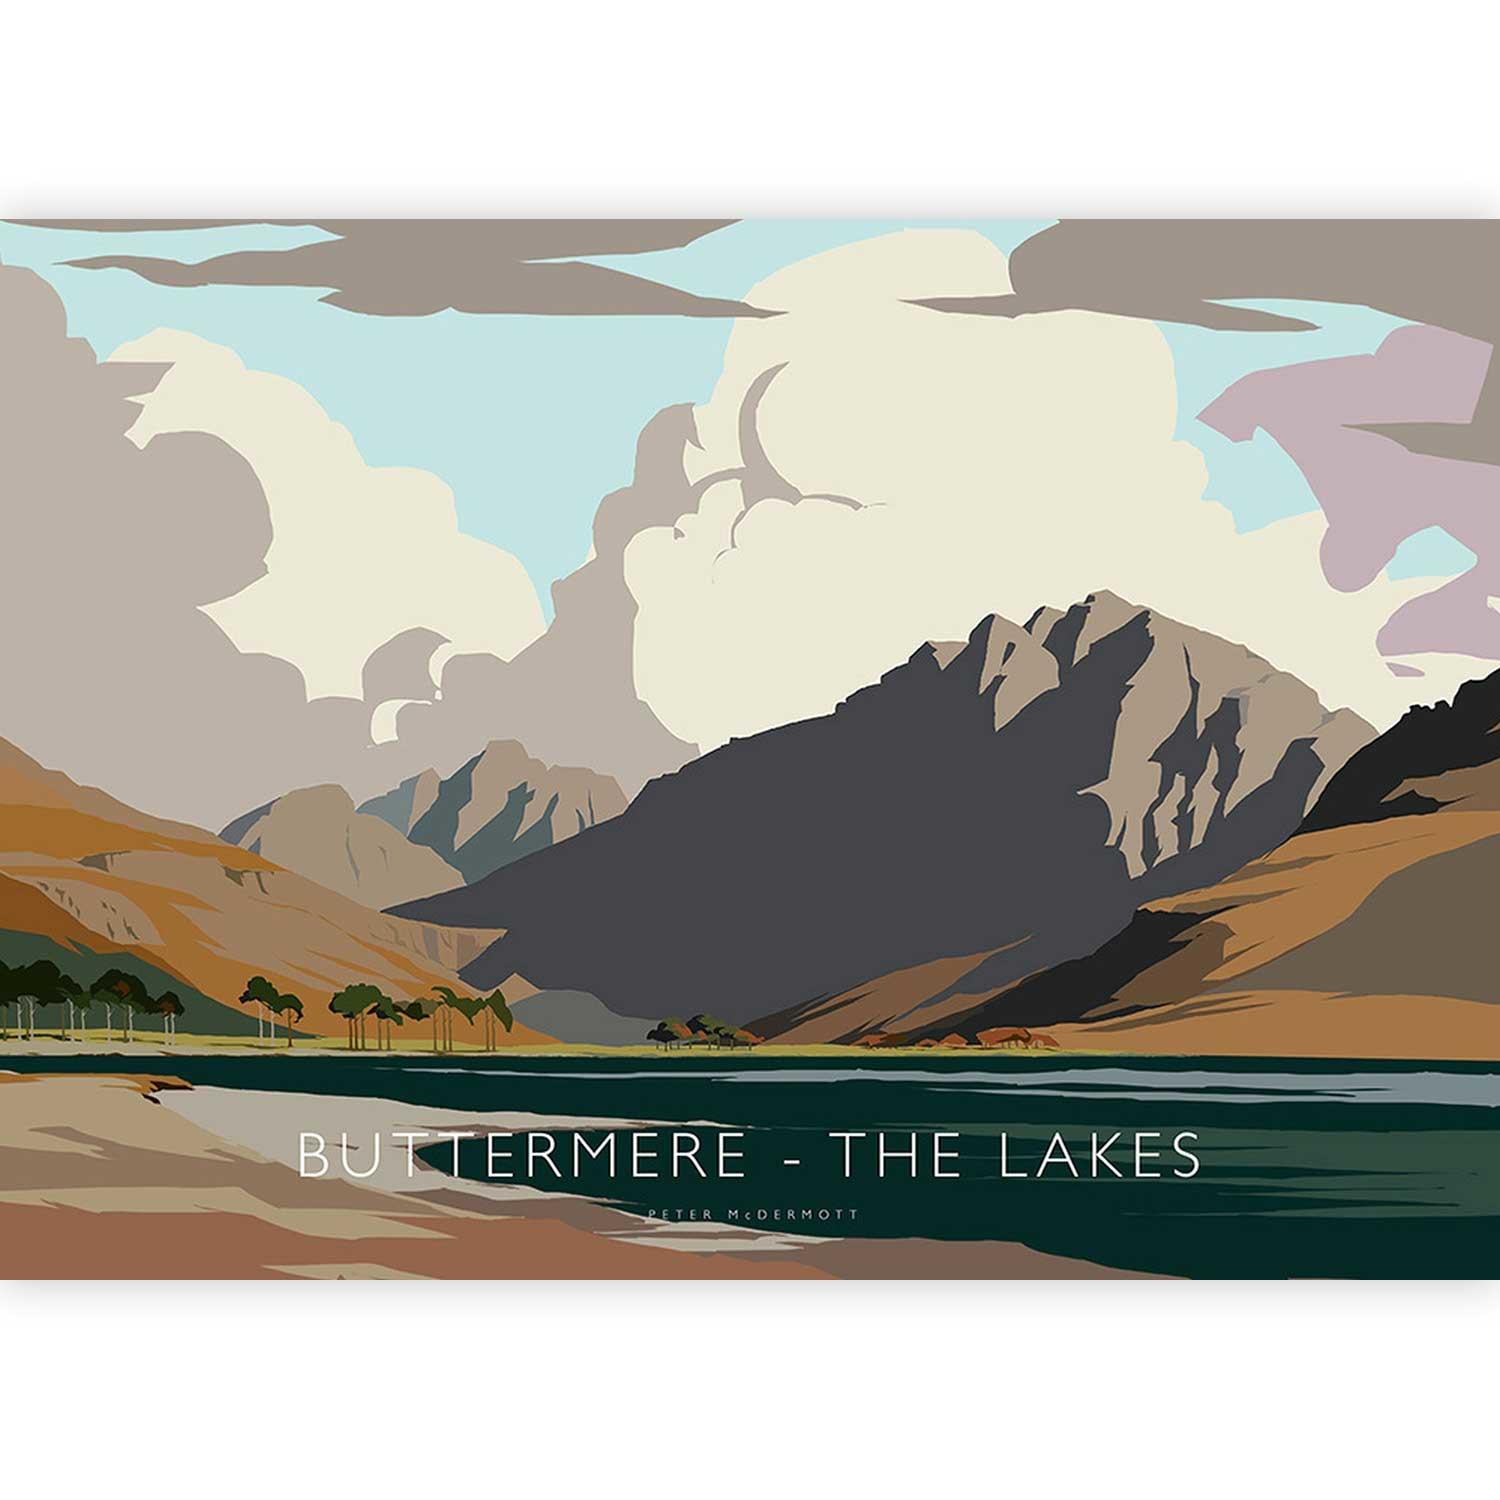 Buttermere The Lakes by Peter McDermott